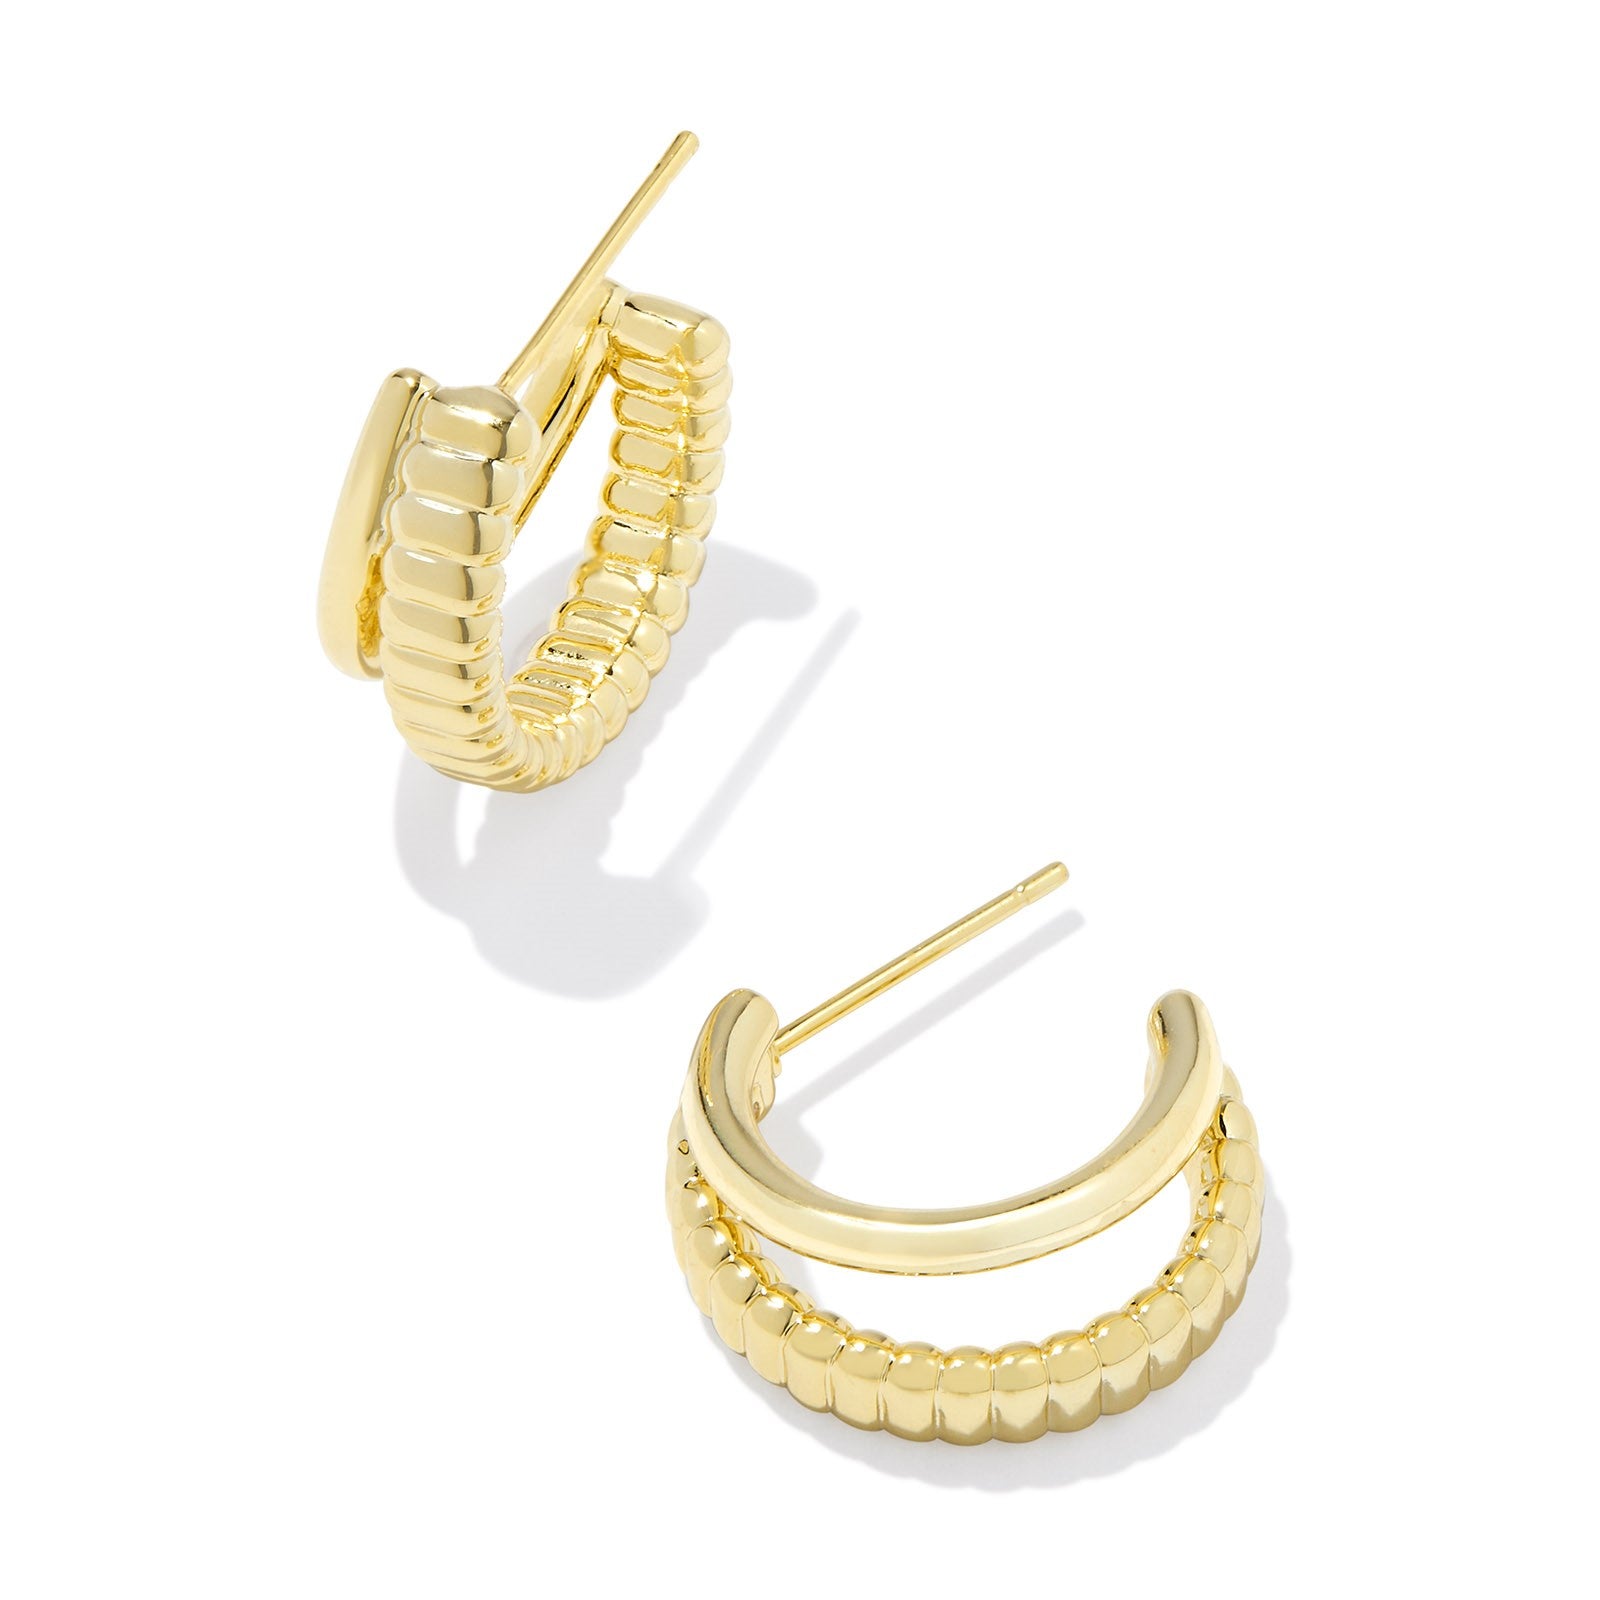 Kendra Scott | Layne Gold Huggie Earrings - Giddy Up Glamour Boutique